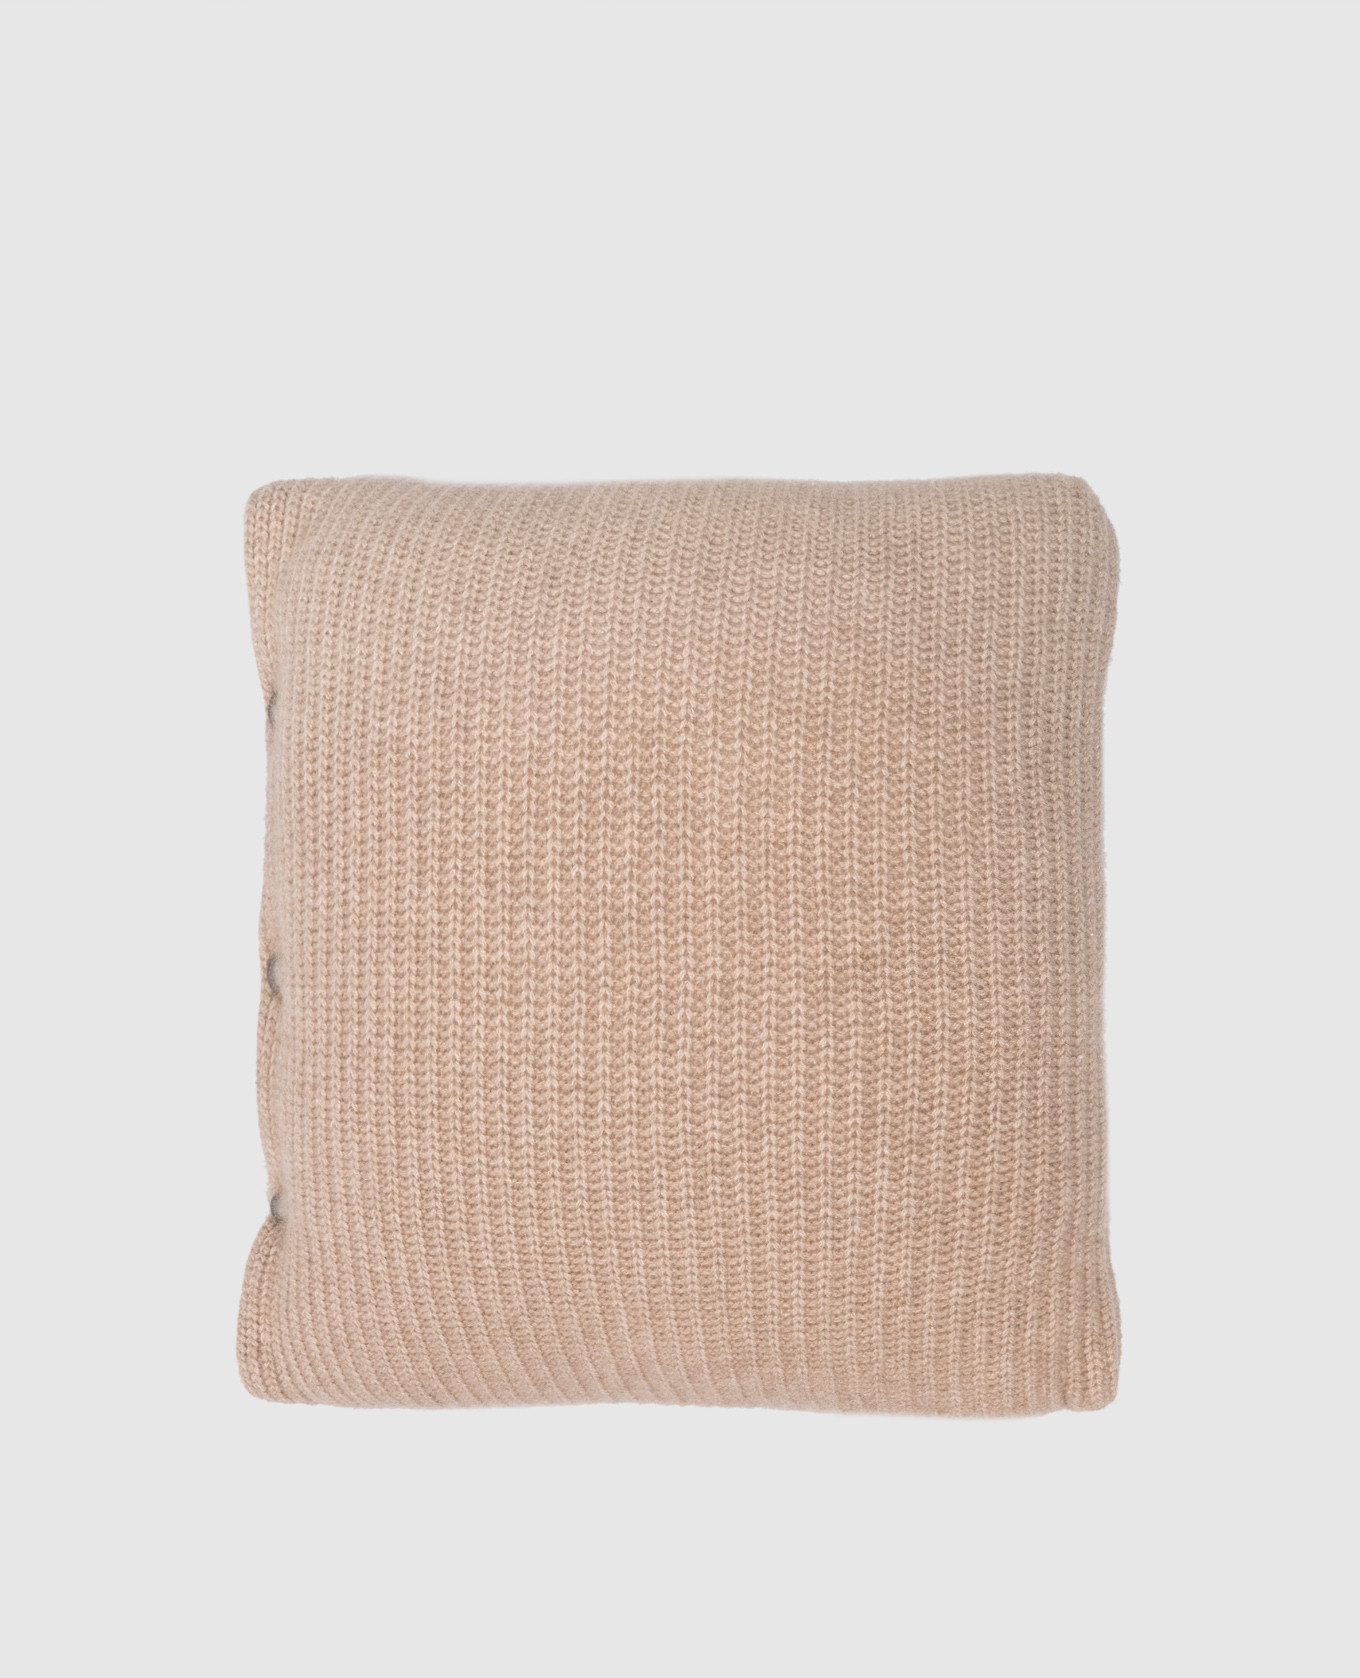 Brown cashmere checkered pillow